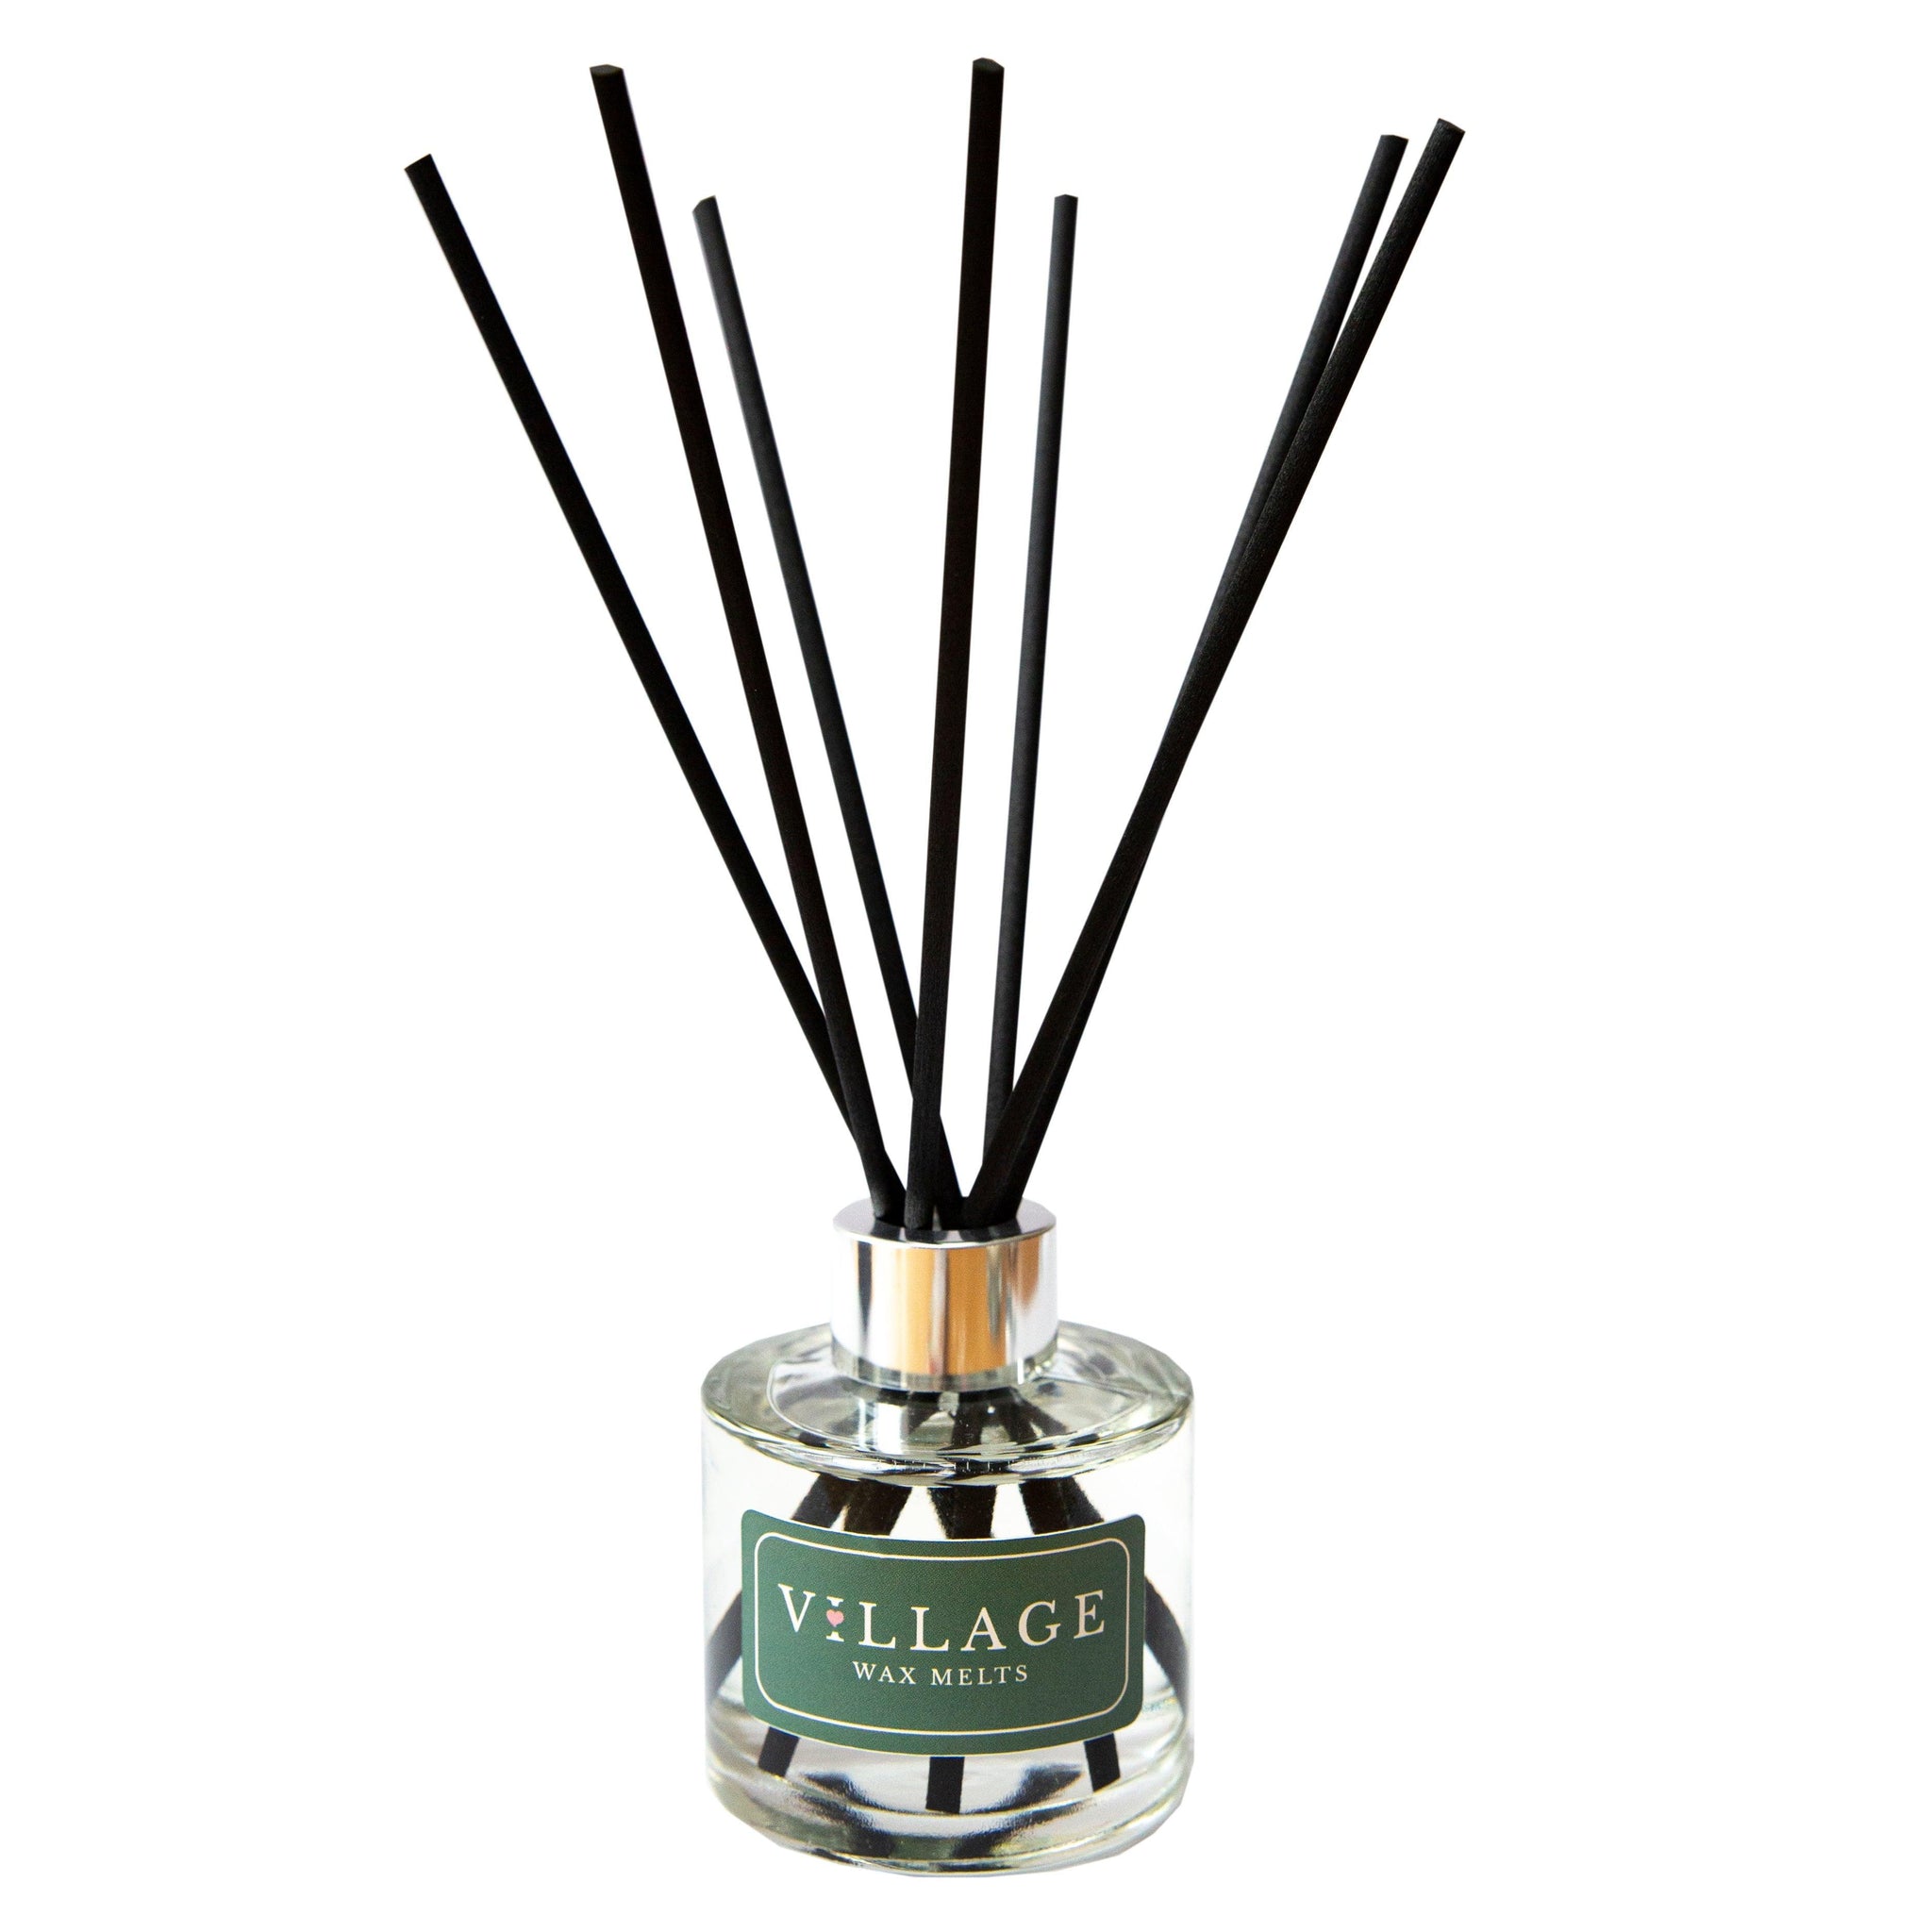 Crede Reed Diffuser - Village Wax Melts